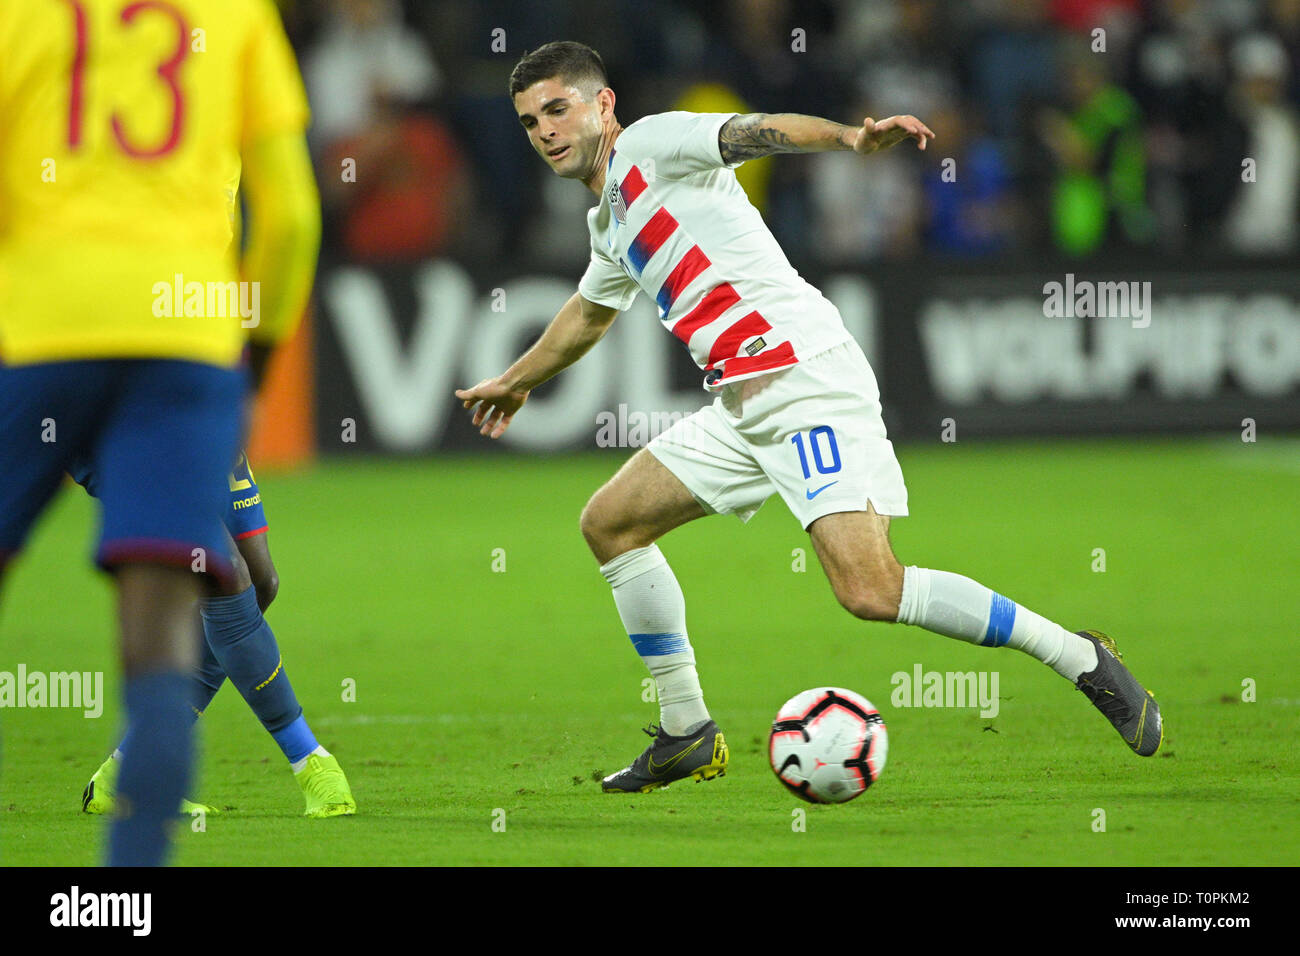 Christian Pulisic Nike High Resolution Stock Photography and Images - Alamy